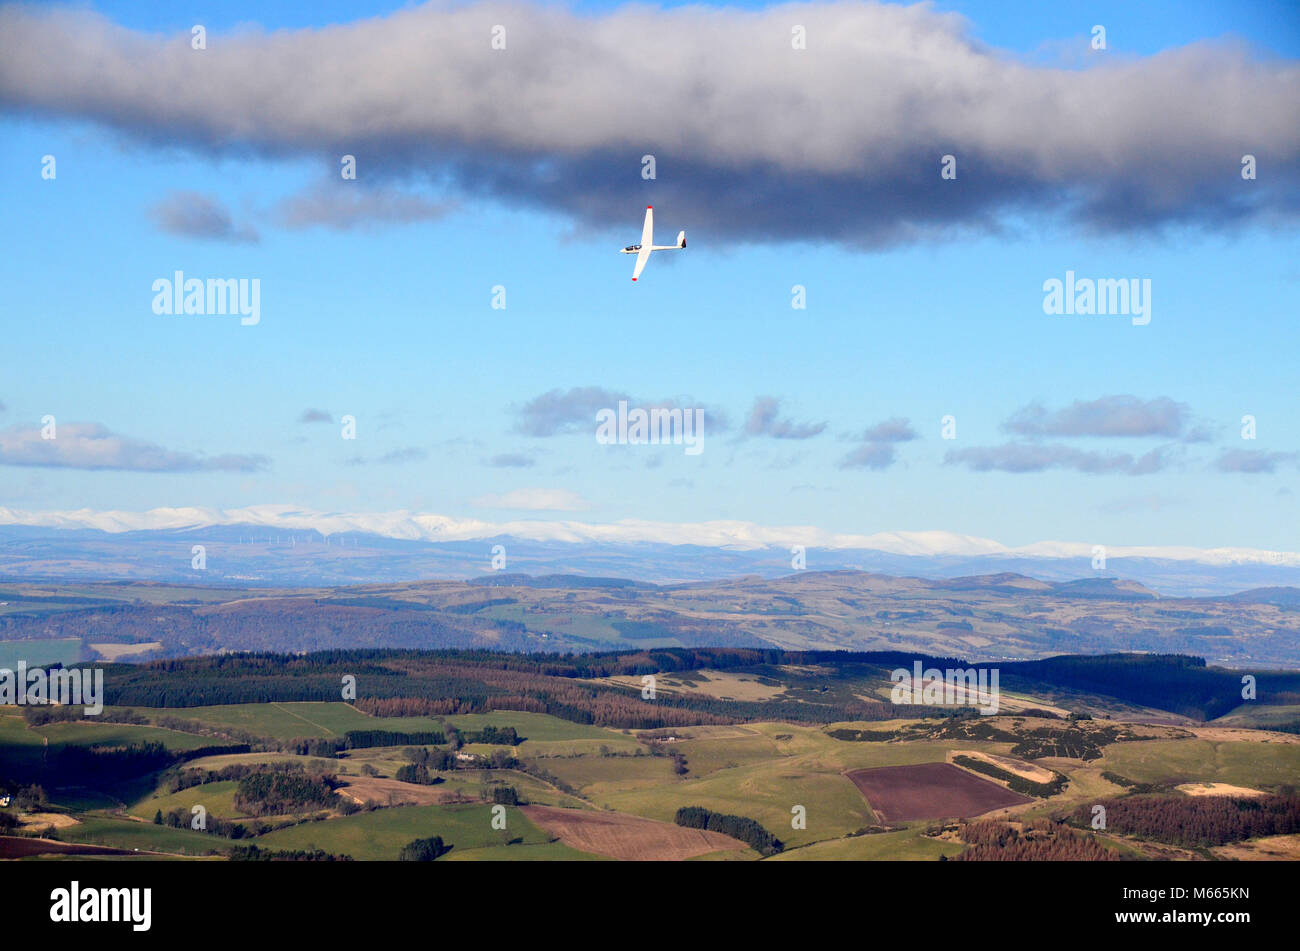 View from the hilltop of East Lomond in Fife looking inland towards the snow capped cairngorm mountains in the distance.  A glider flies close by.. Stock Photo